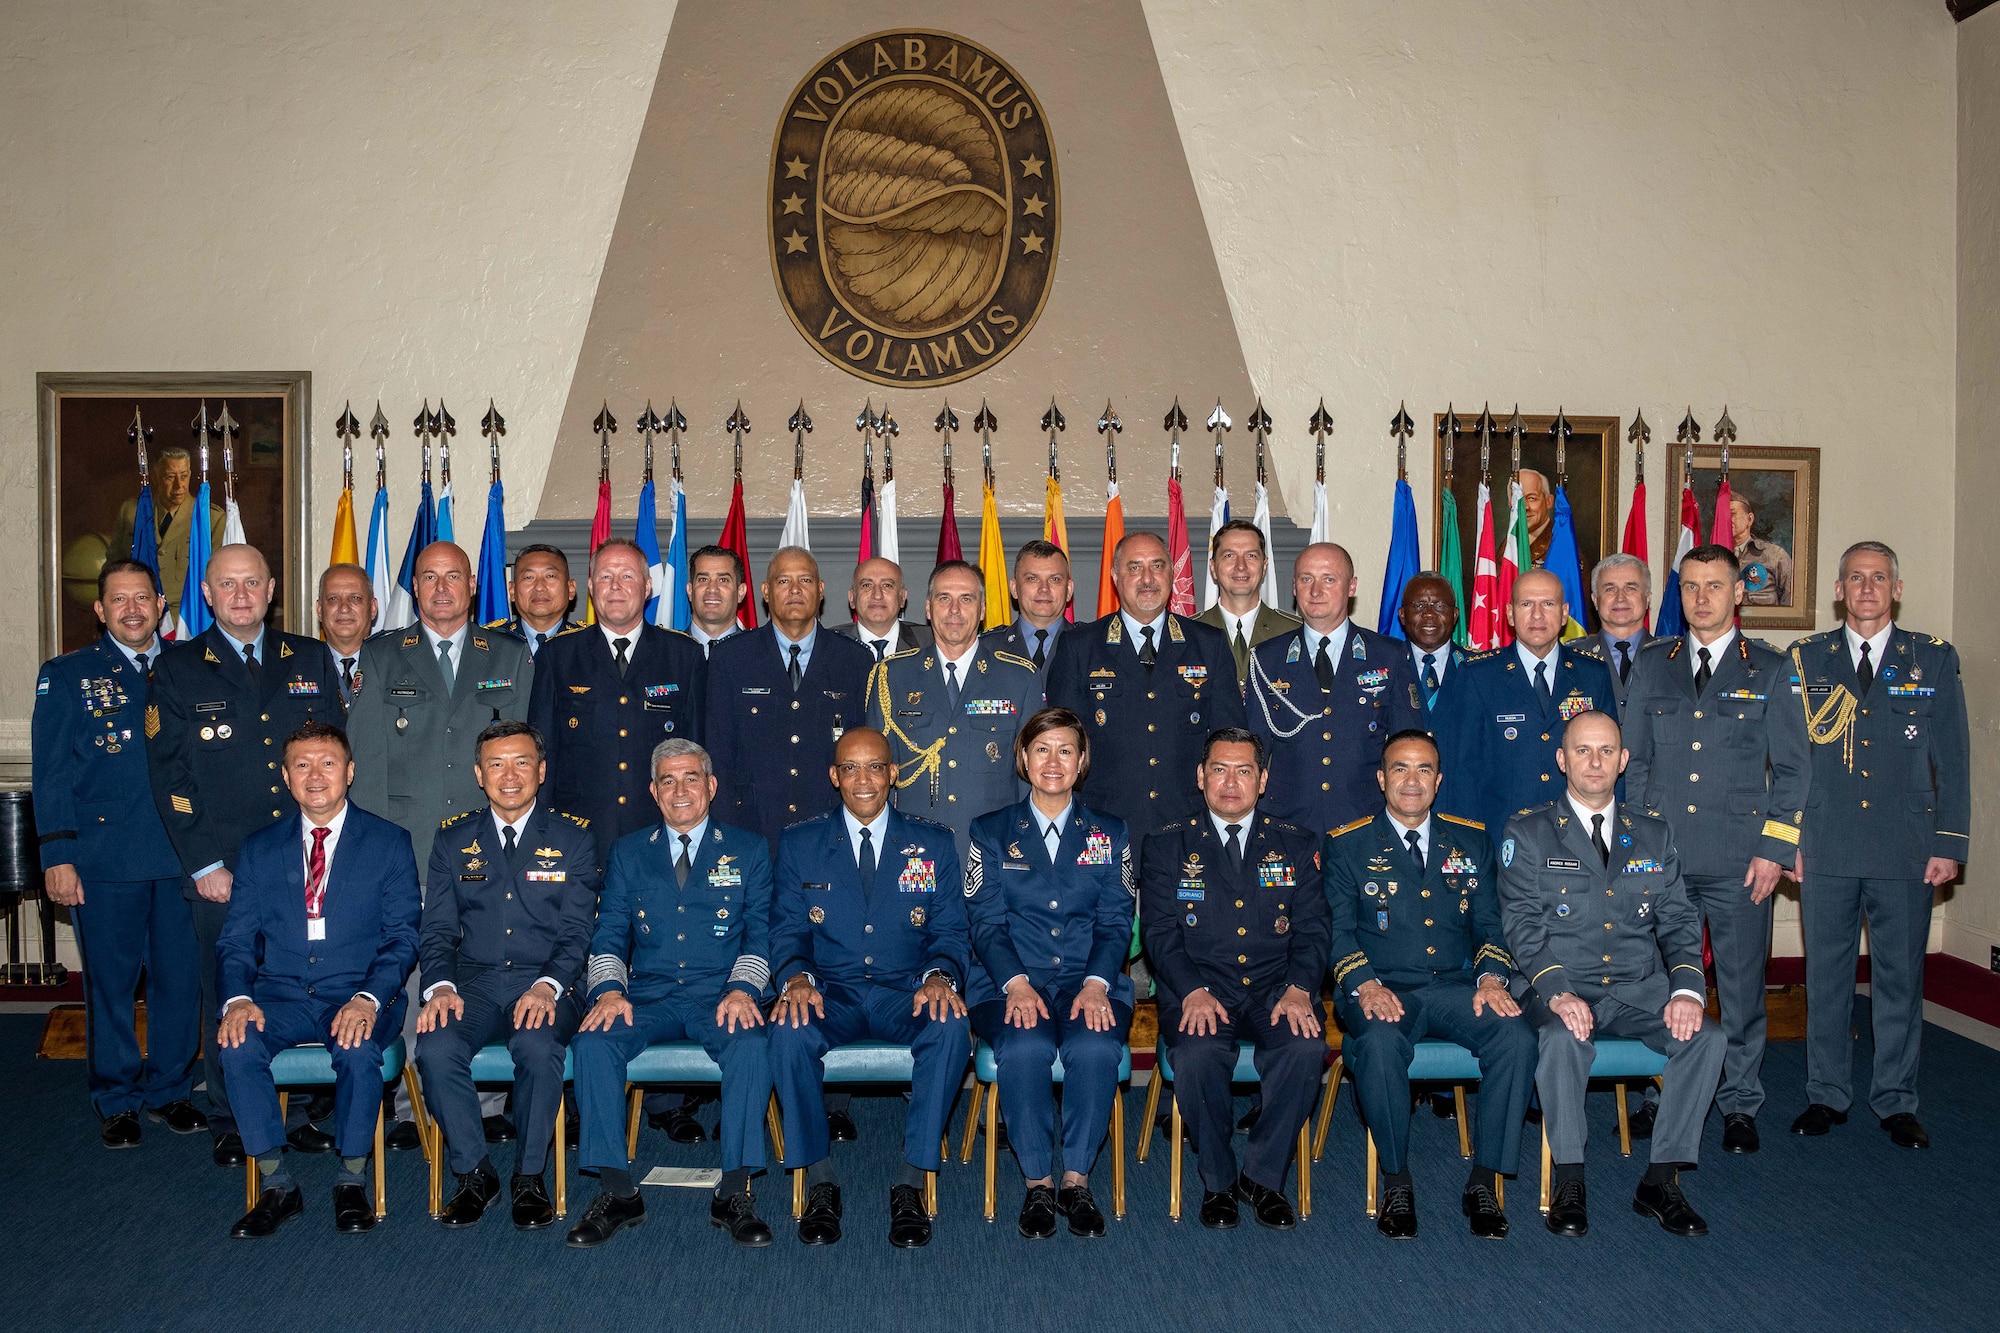 Air Force Chief of Staff Gen. CQ Brown, Jr. and Chief Master Sergeant of the Air Force JoAnne Bass pose with the international officers and senior enlisted leaders inducted into the 2022 Chief of Staff and Chief Master Sergeant of the Air Force International Honor Roll during a ceremony, April 13, 2022, Maxwell Air Force Base, Ala. (U.S. Air Force photo by Melanie Rodgers Cox)